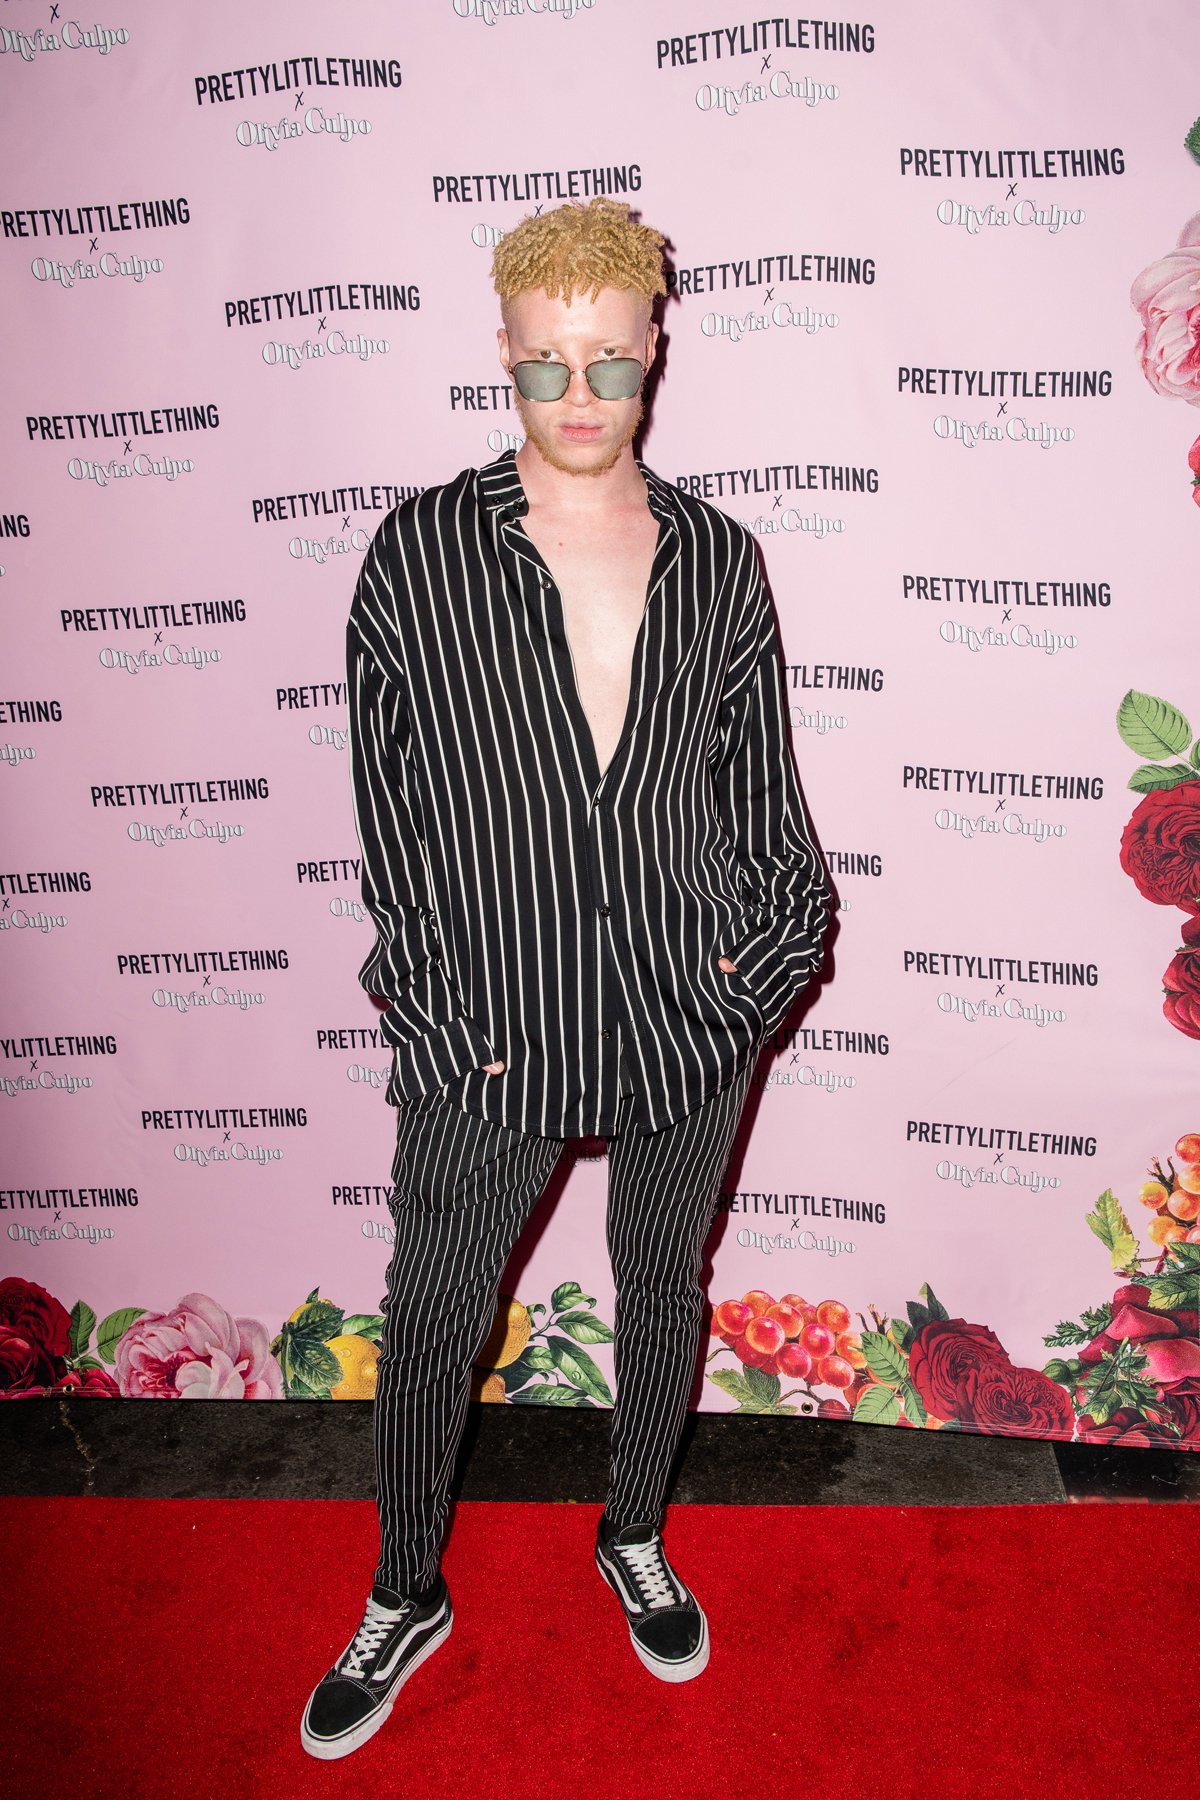 PrettyLittleThing PLT X Olivia Culpo Collection  Celebrity Launch Party Shaun Ross.jpg